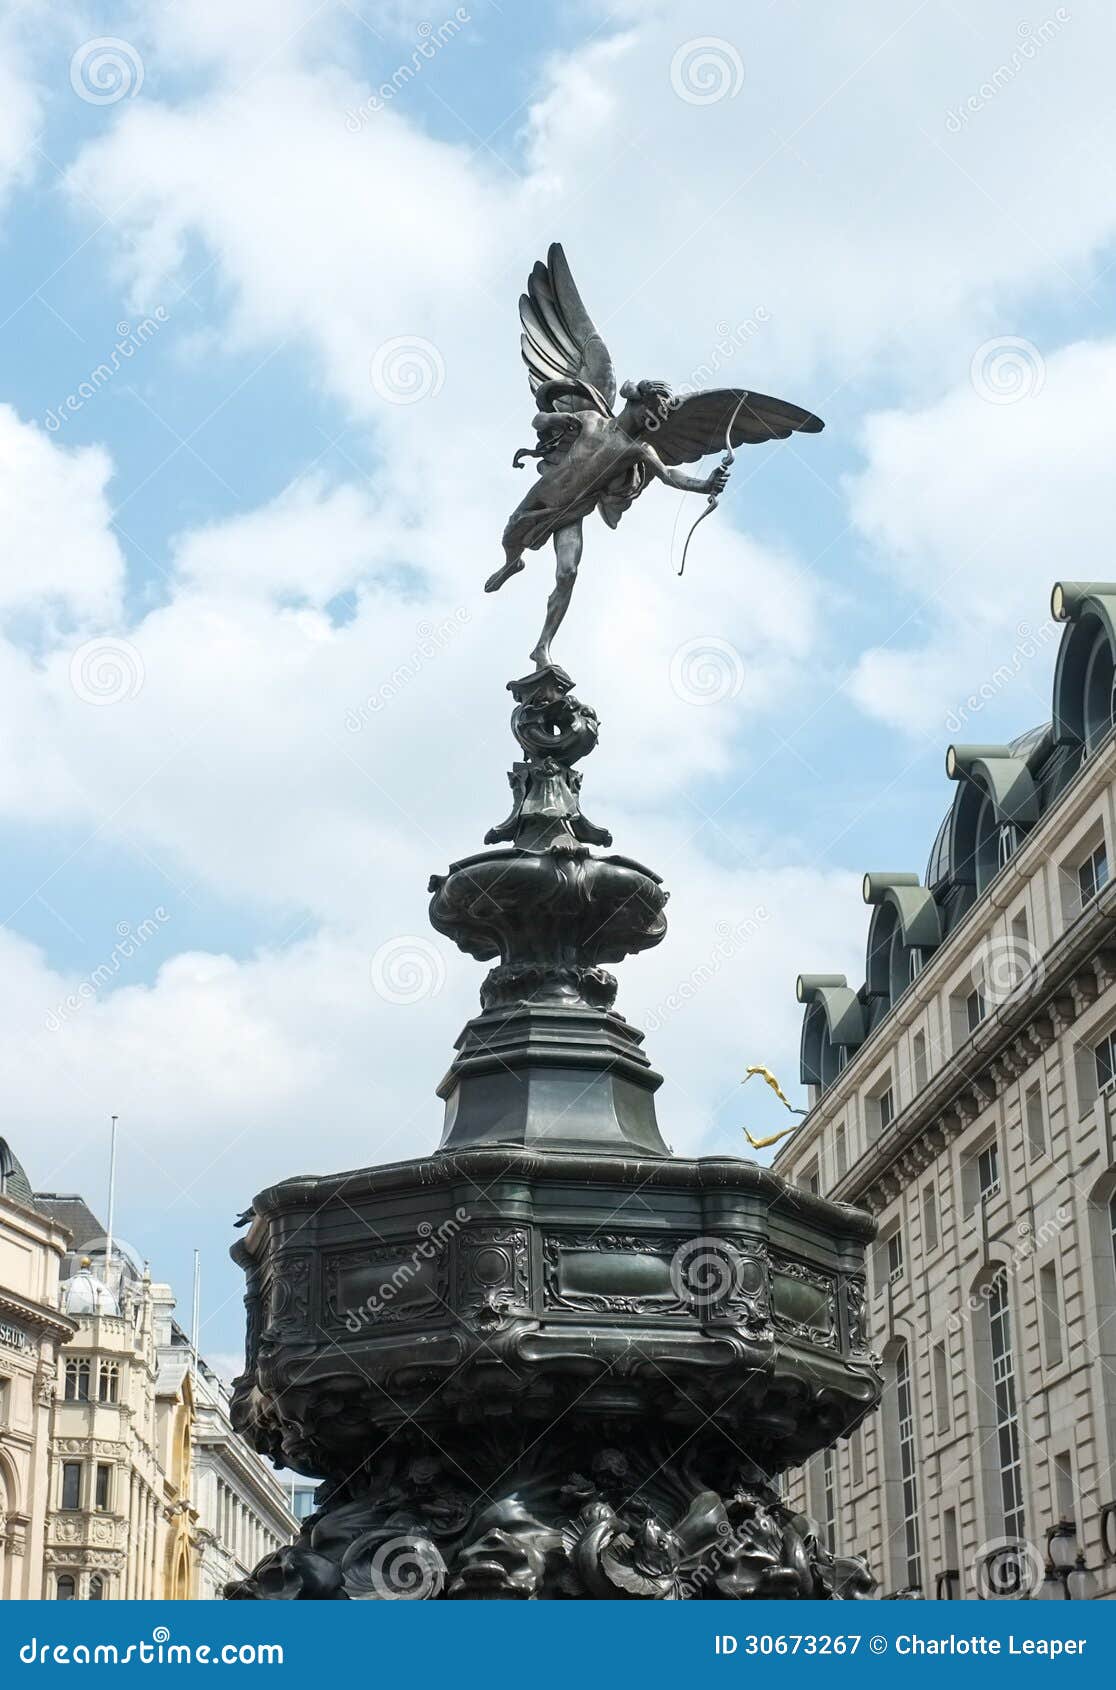 eros statue, piccadilly circus, london